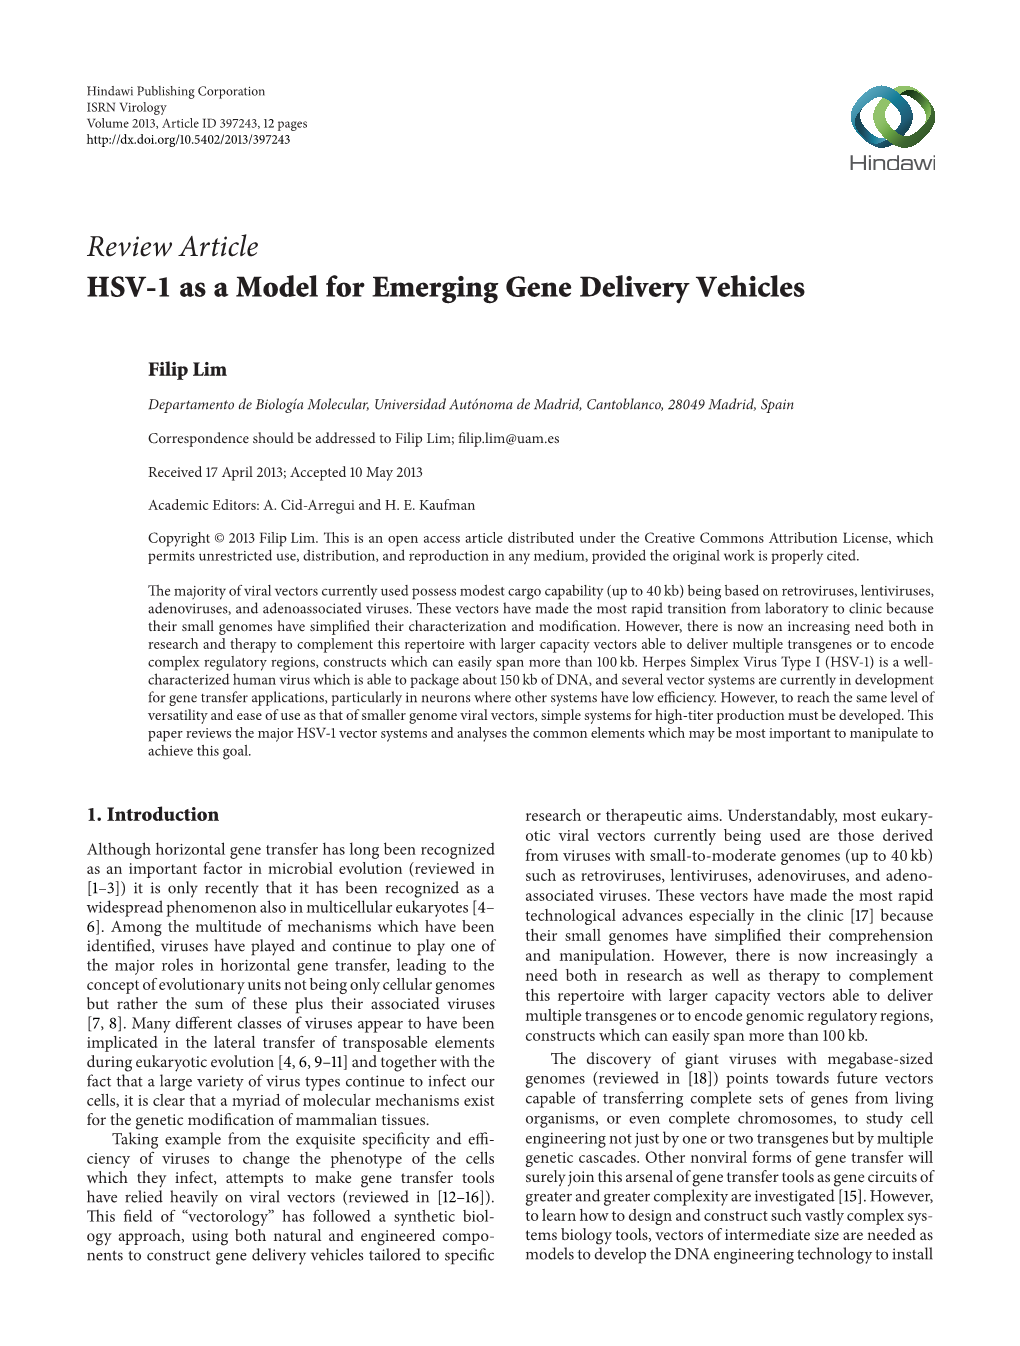 HSV-1 As a Model for Emerging Gene Delivery Vehicles